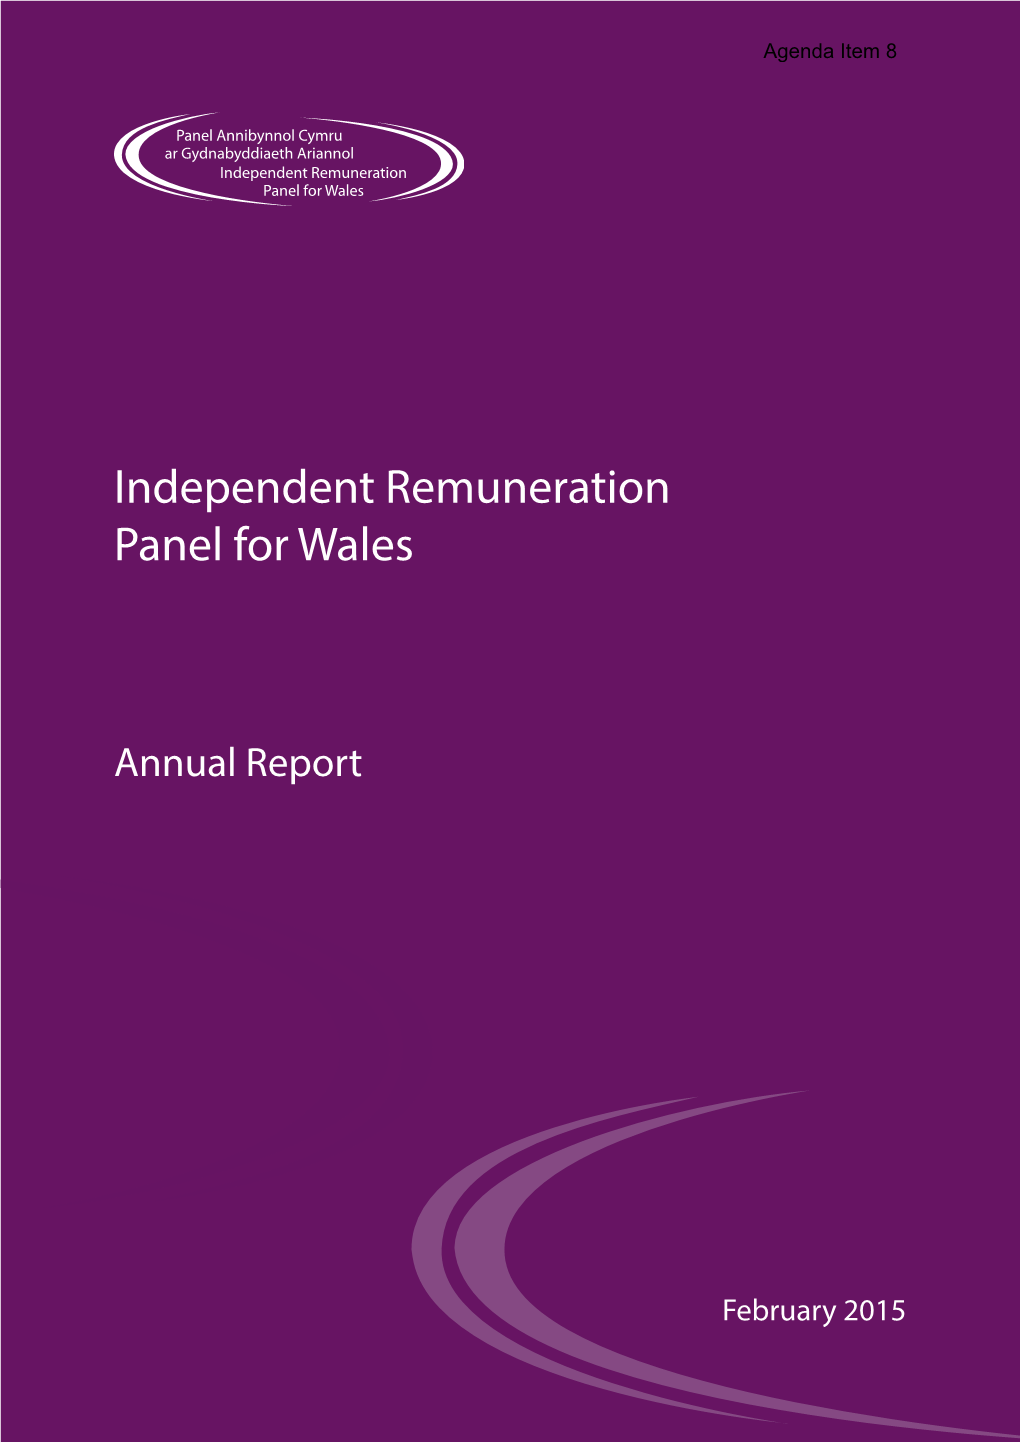 Independent Remuneration Panel for Wales